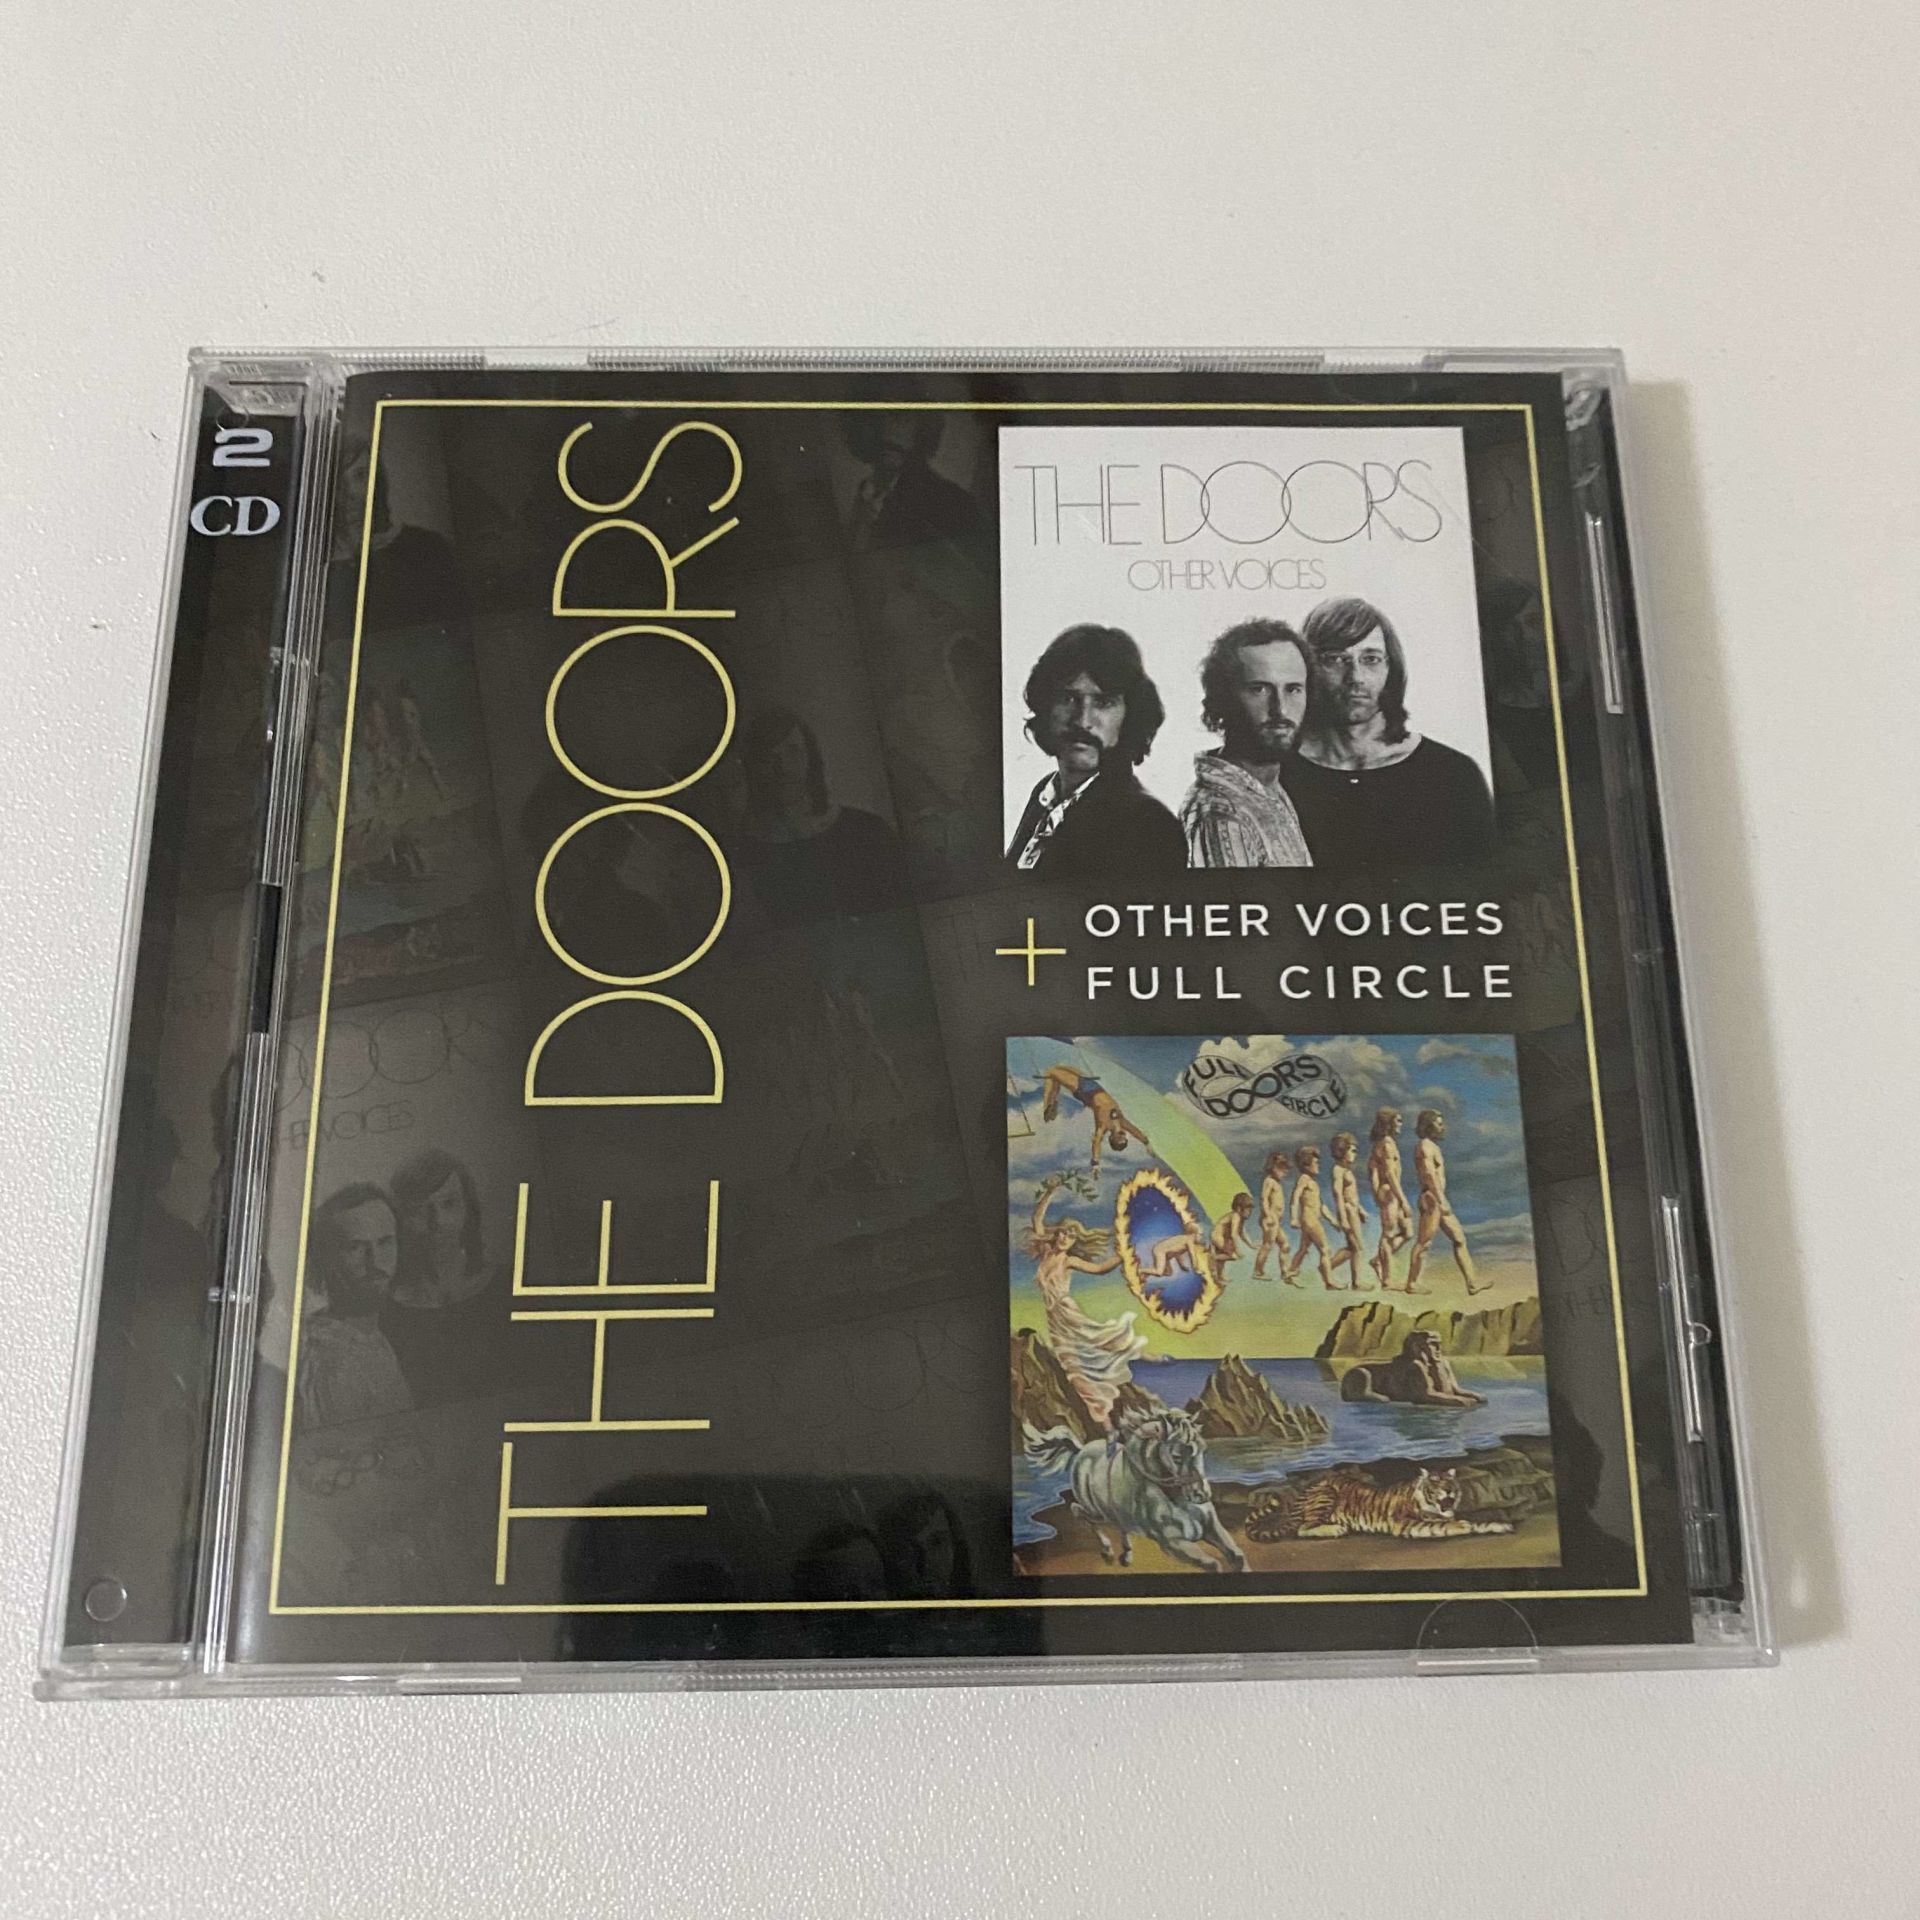 The Doors – Other Voices + Full Circle  2 CD